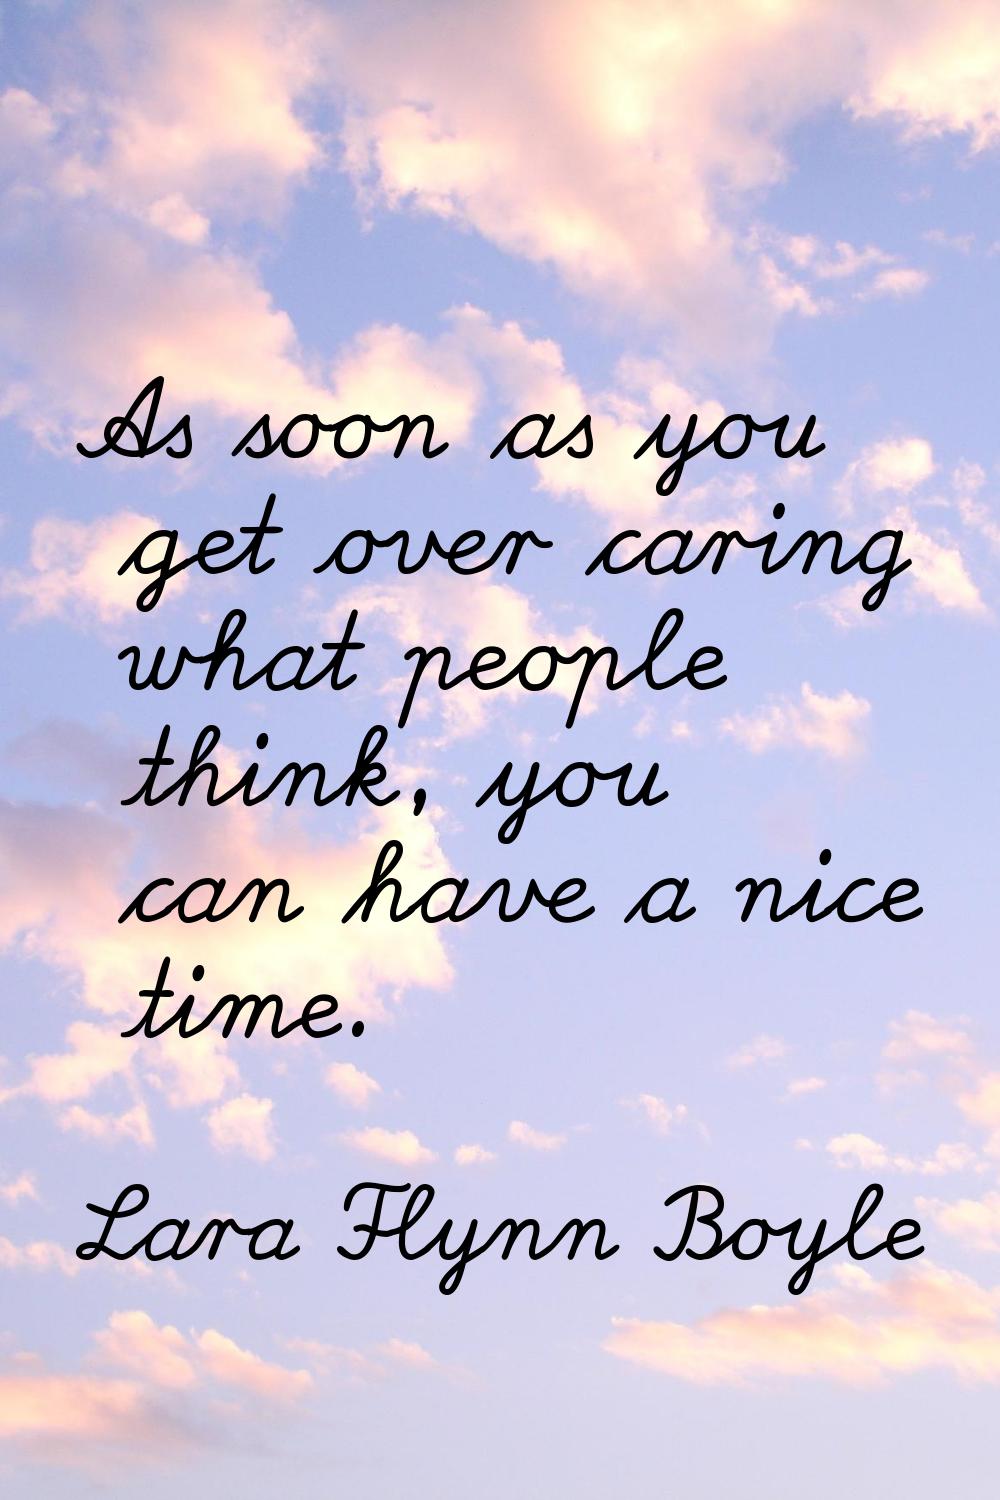 As soon as you get over caring what people think, you can have a nice time.